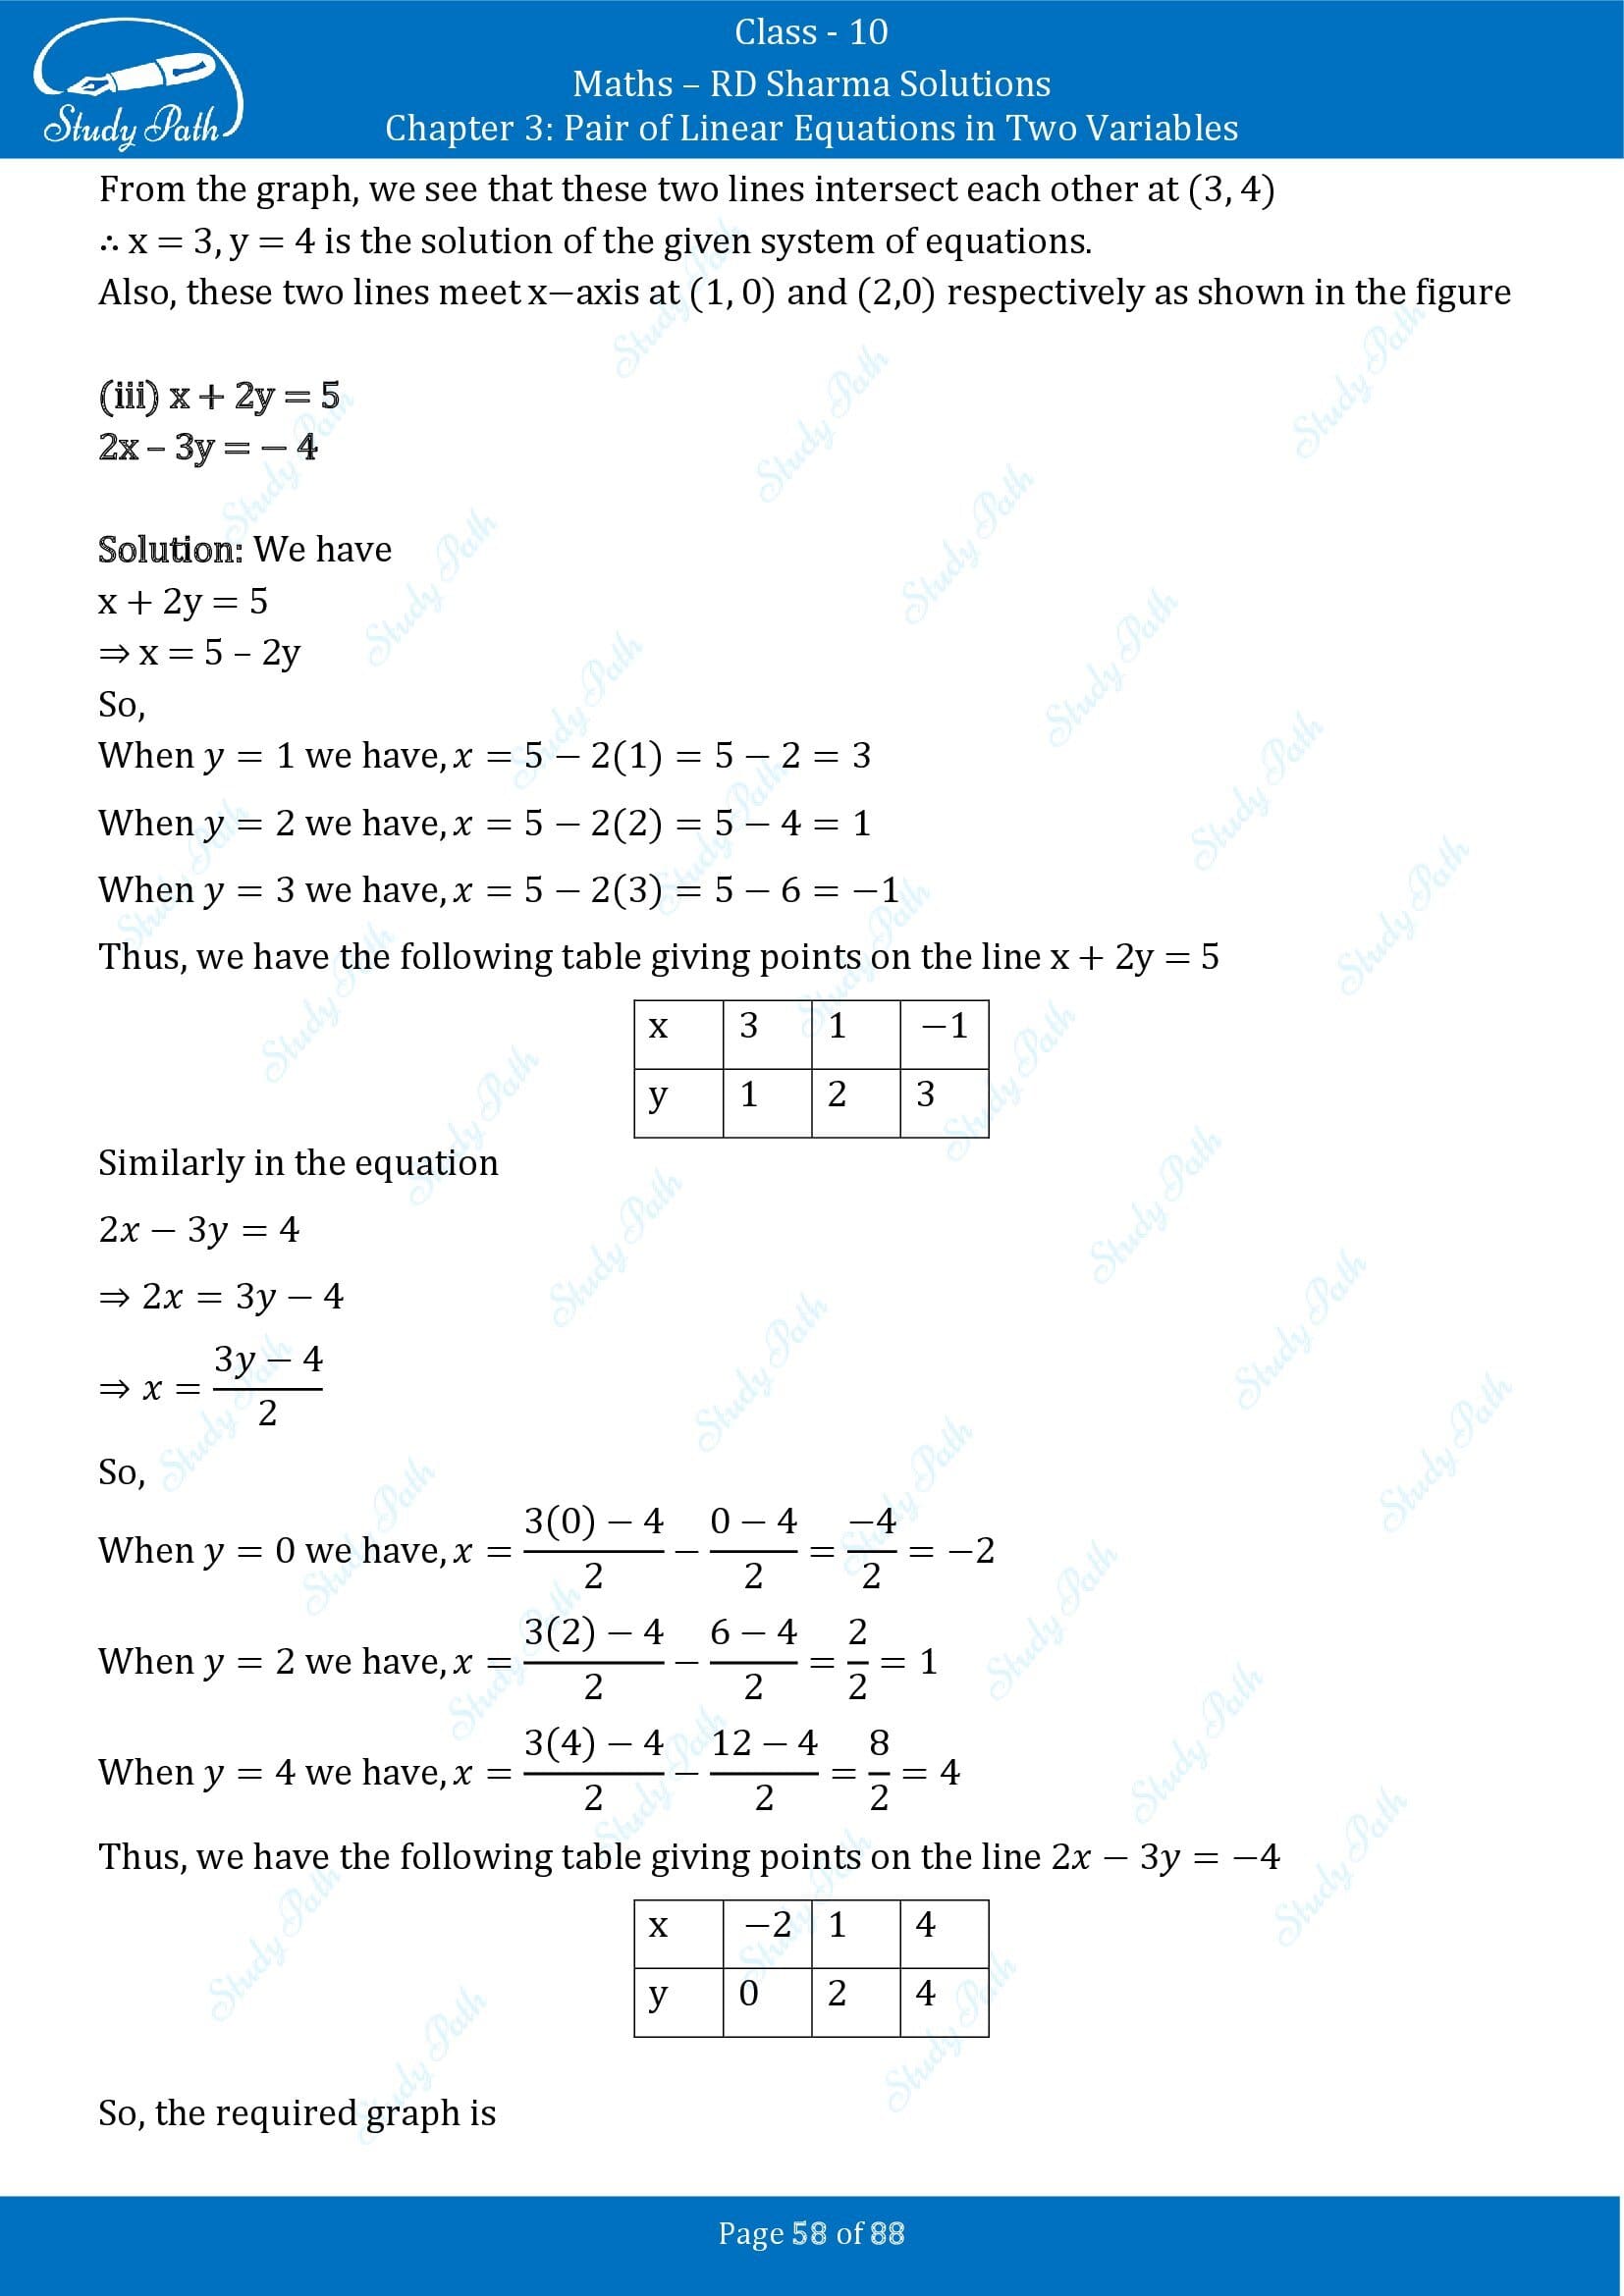 RD Sharma Solutions Class 10 Chapter 3 Pair of Linear Equations in Two Variables Exercise 3.2 00058